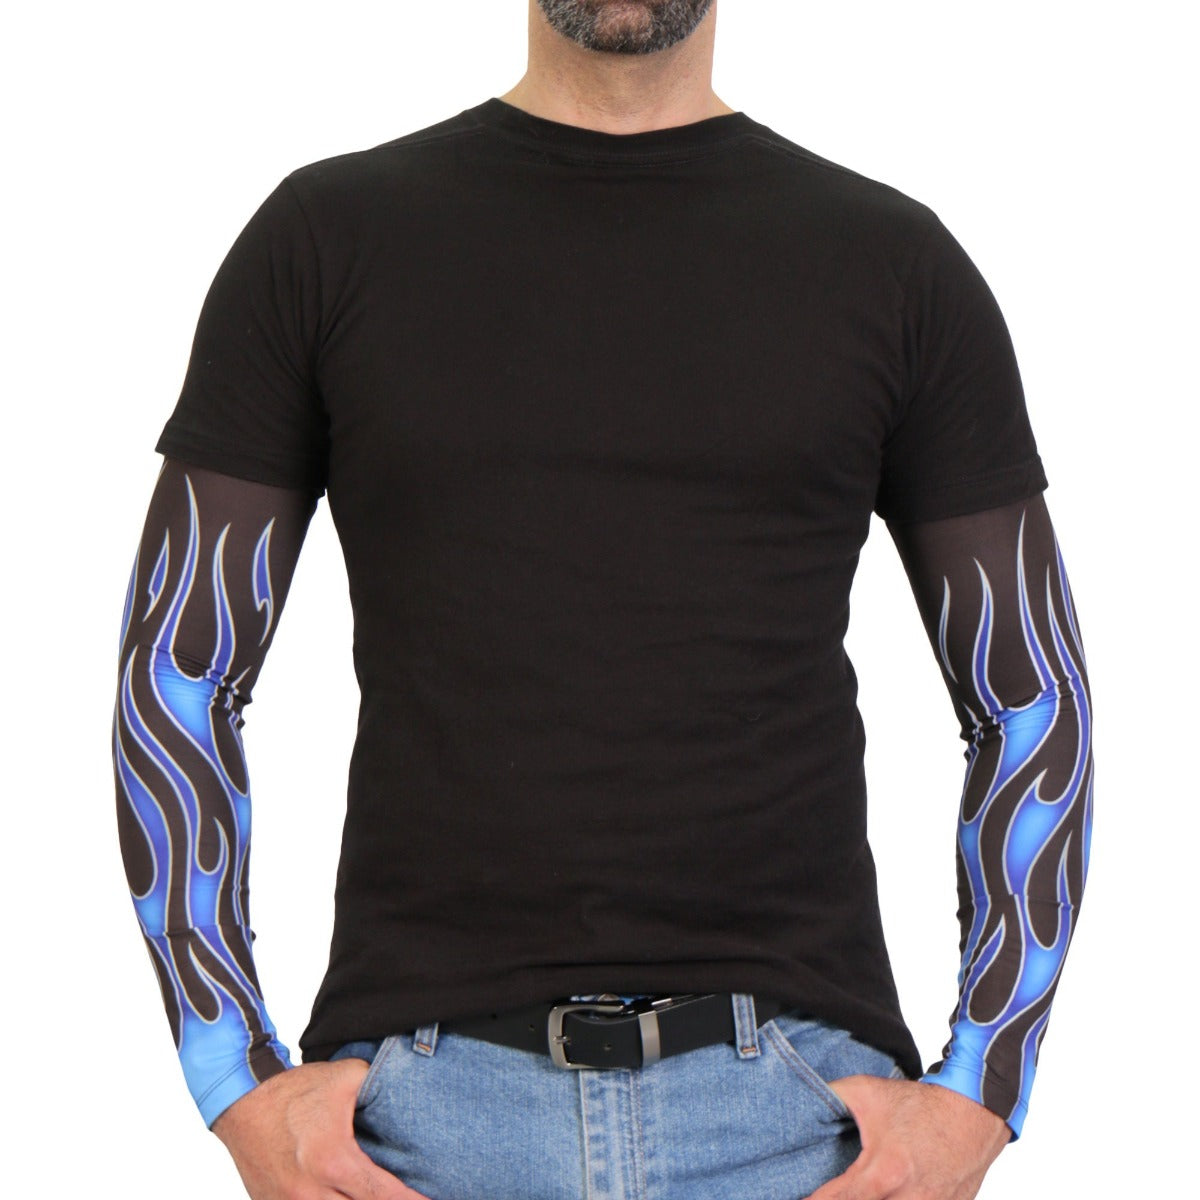 Hot Leathers Blue Flames Arm Sleeve